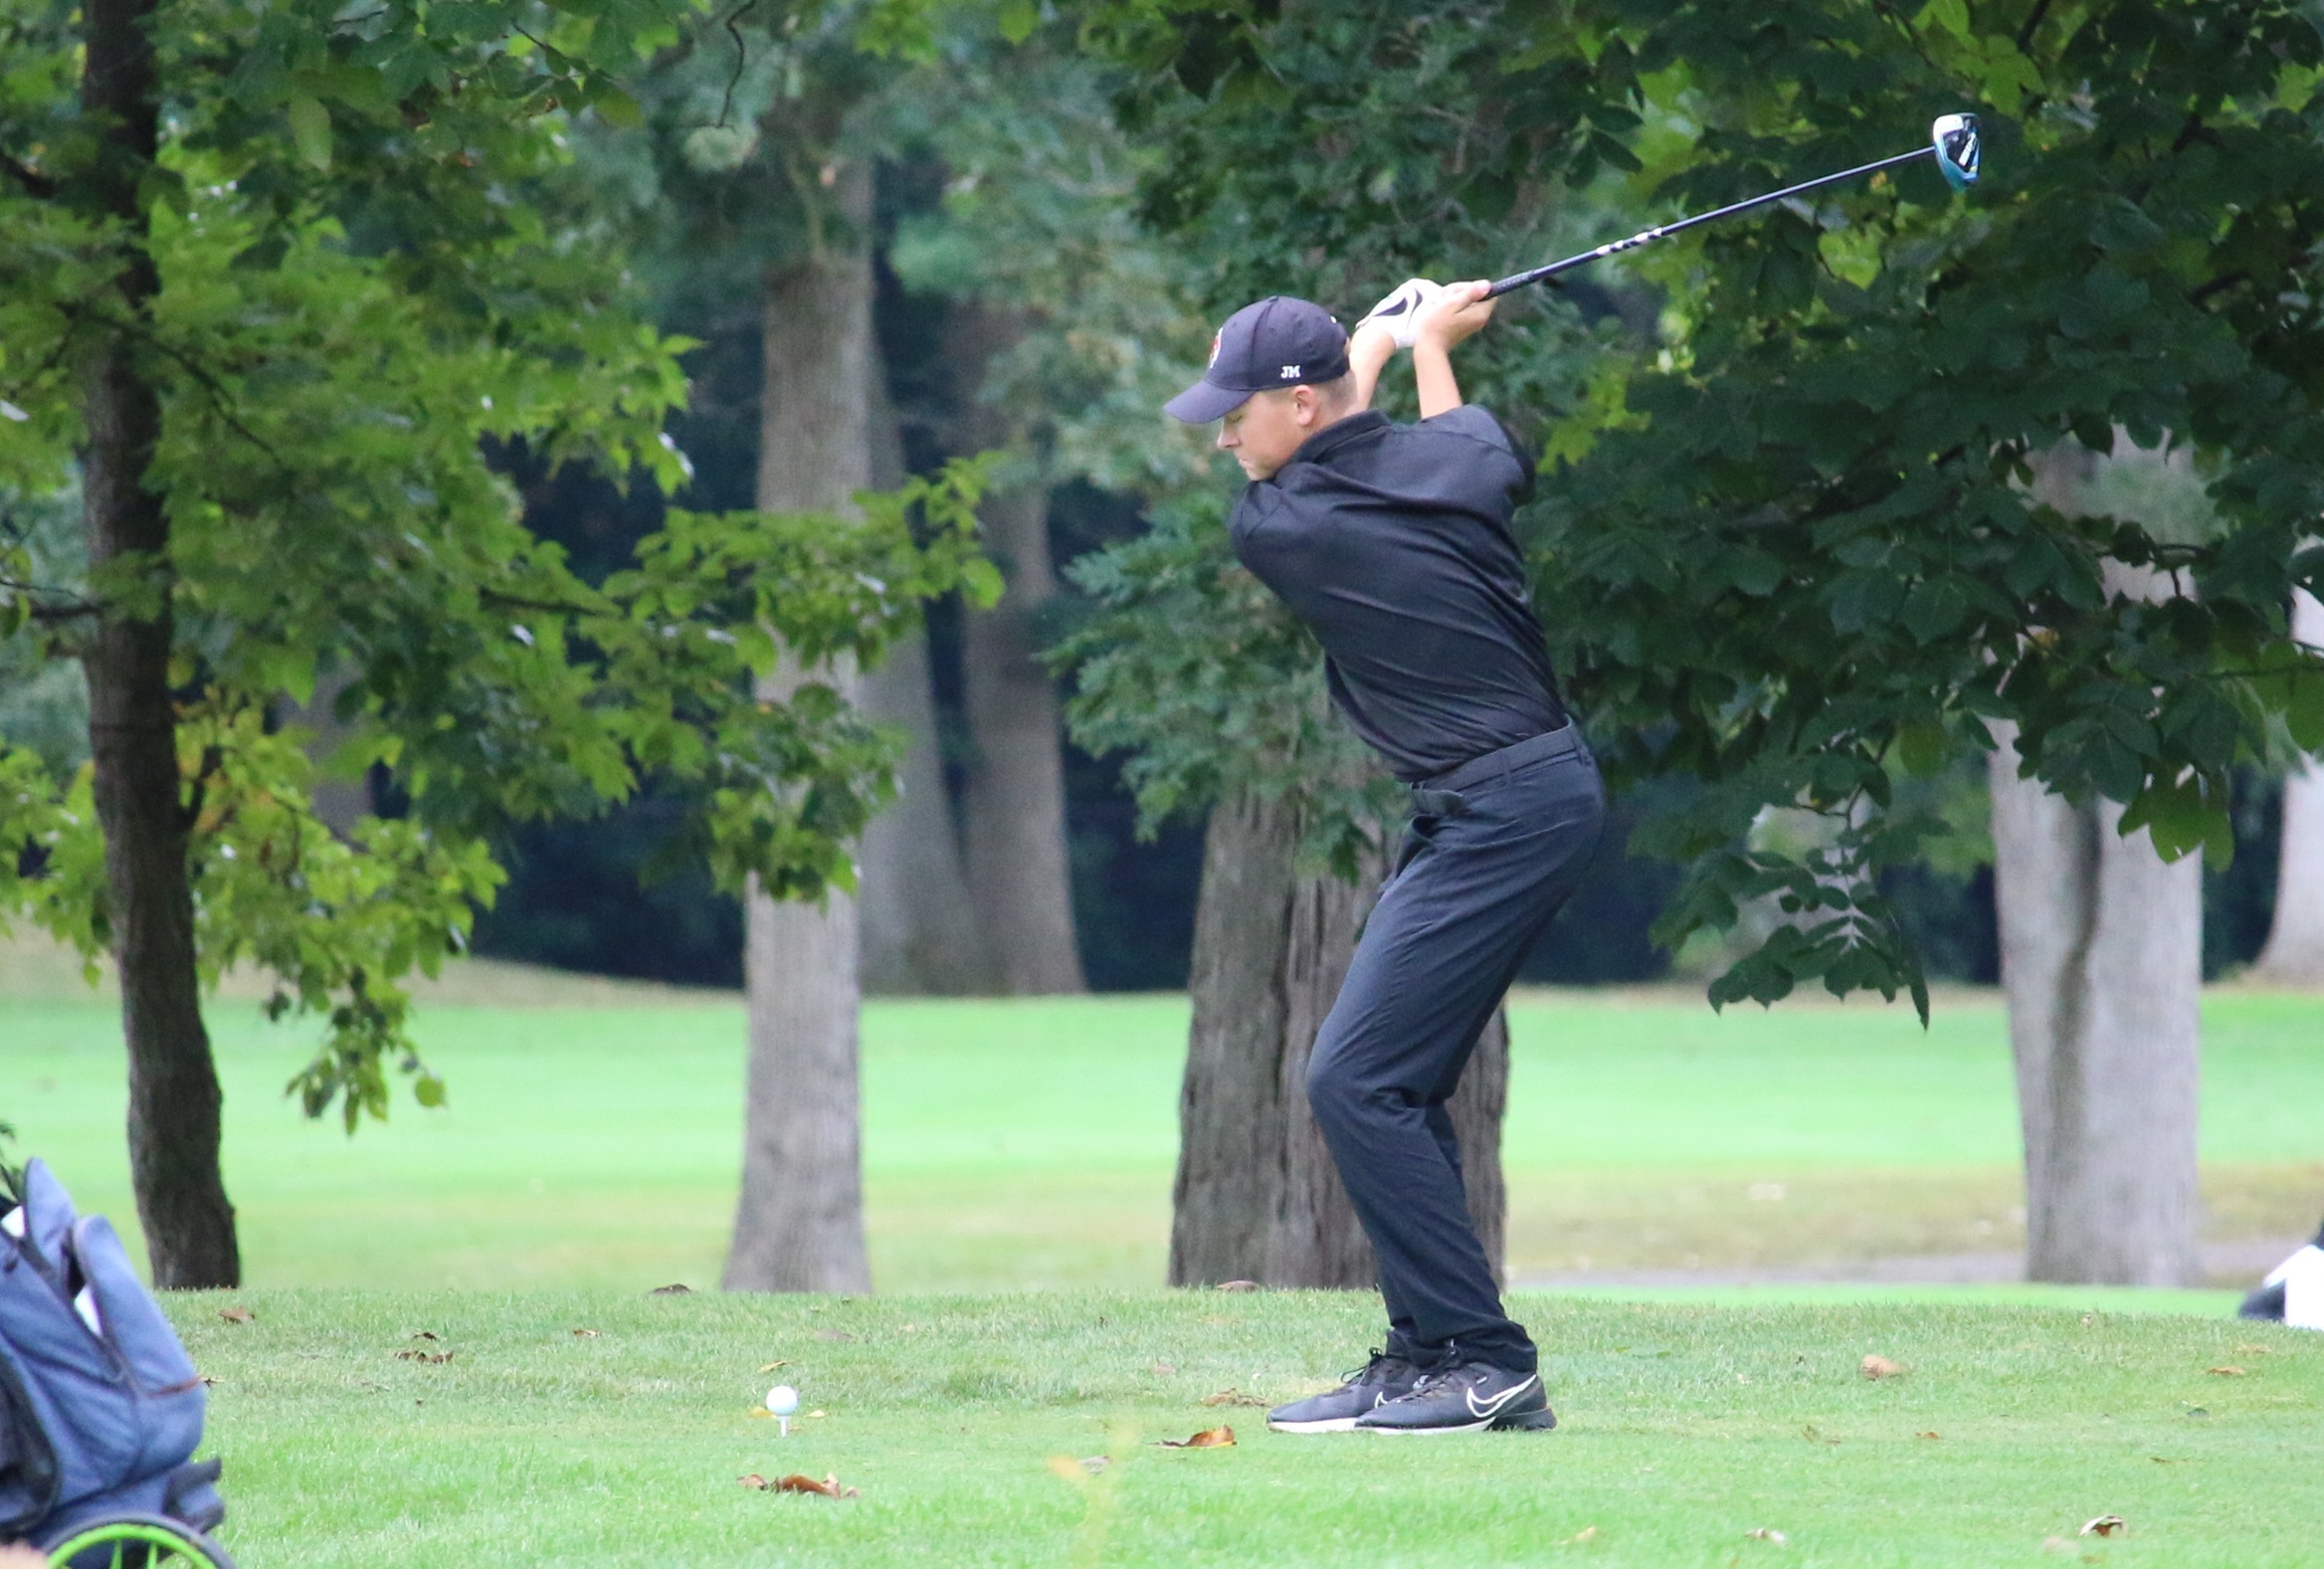 Men's Golf opens up Spring Season at the Heritage Hills Collegiate